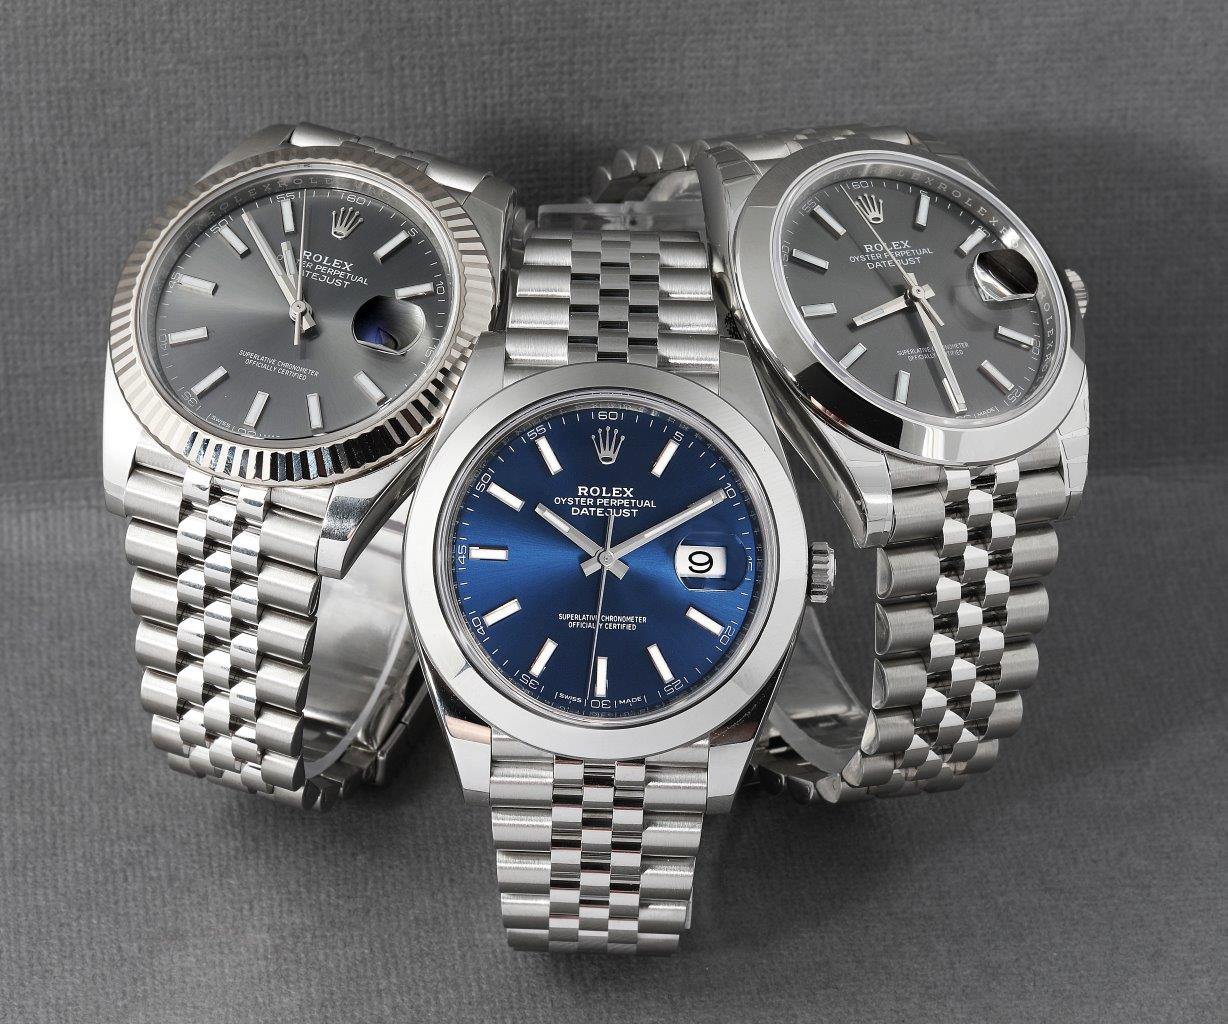 Replica Rolex Datejust Oyster Perpetual Watches